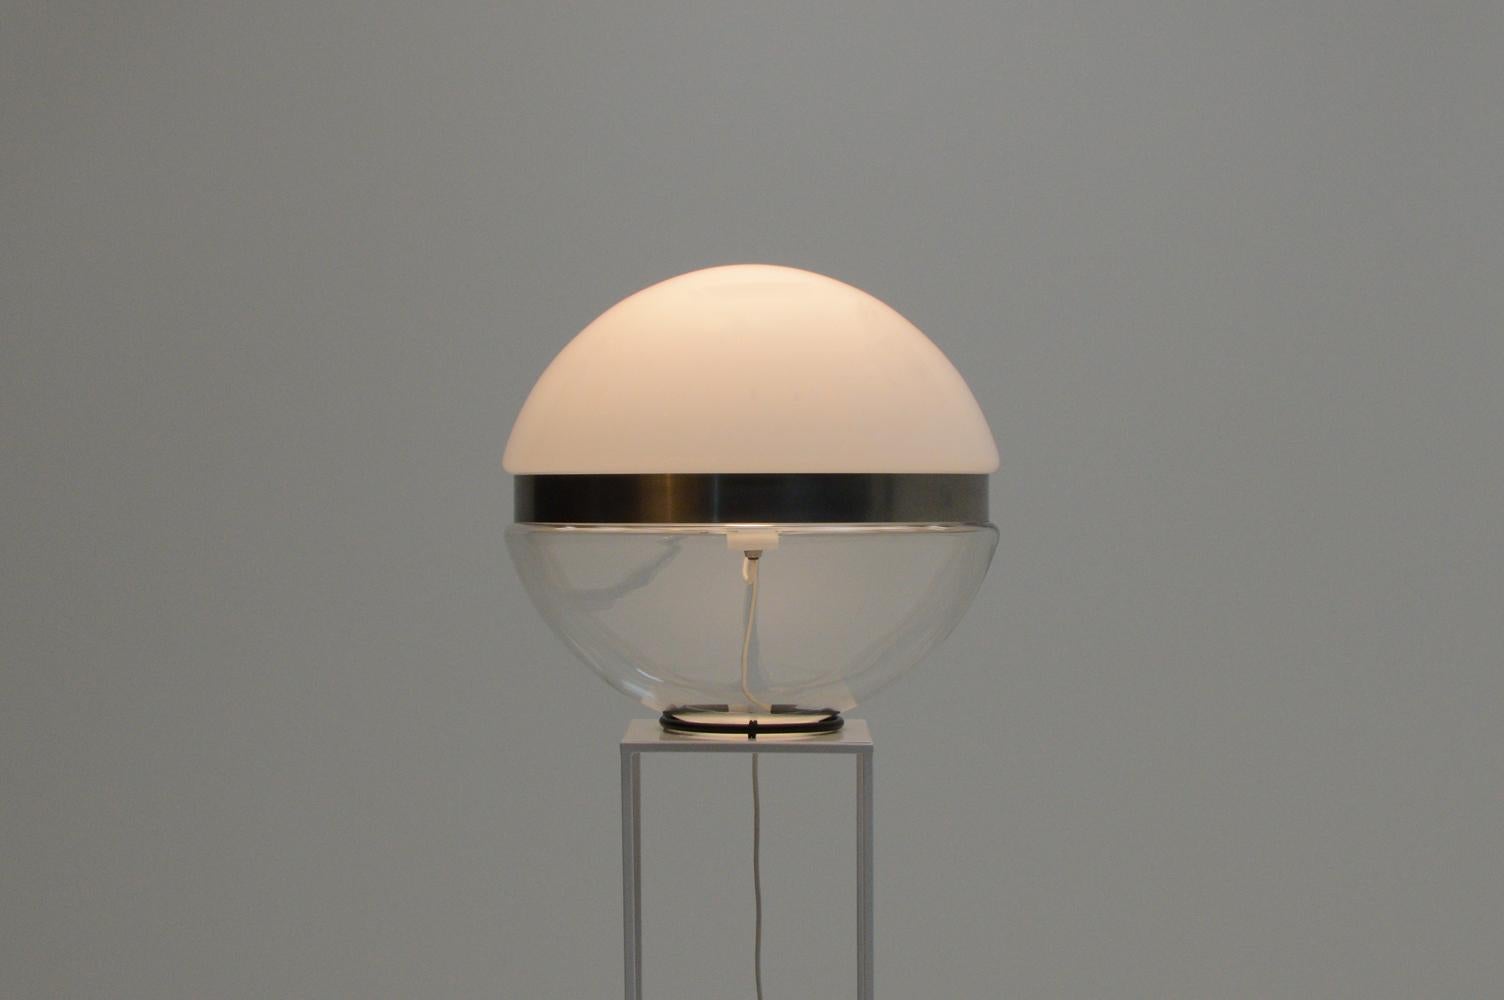 Large glass globe table lamp, 1970s Italy. The globe has a whit glass top, transparent underside and in the middle a brushed steel ring. All stands on a black ring where the wire runs through. The E27 bulb holder floats in the middel of the globe.